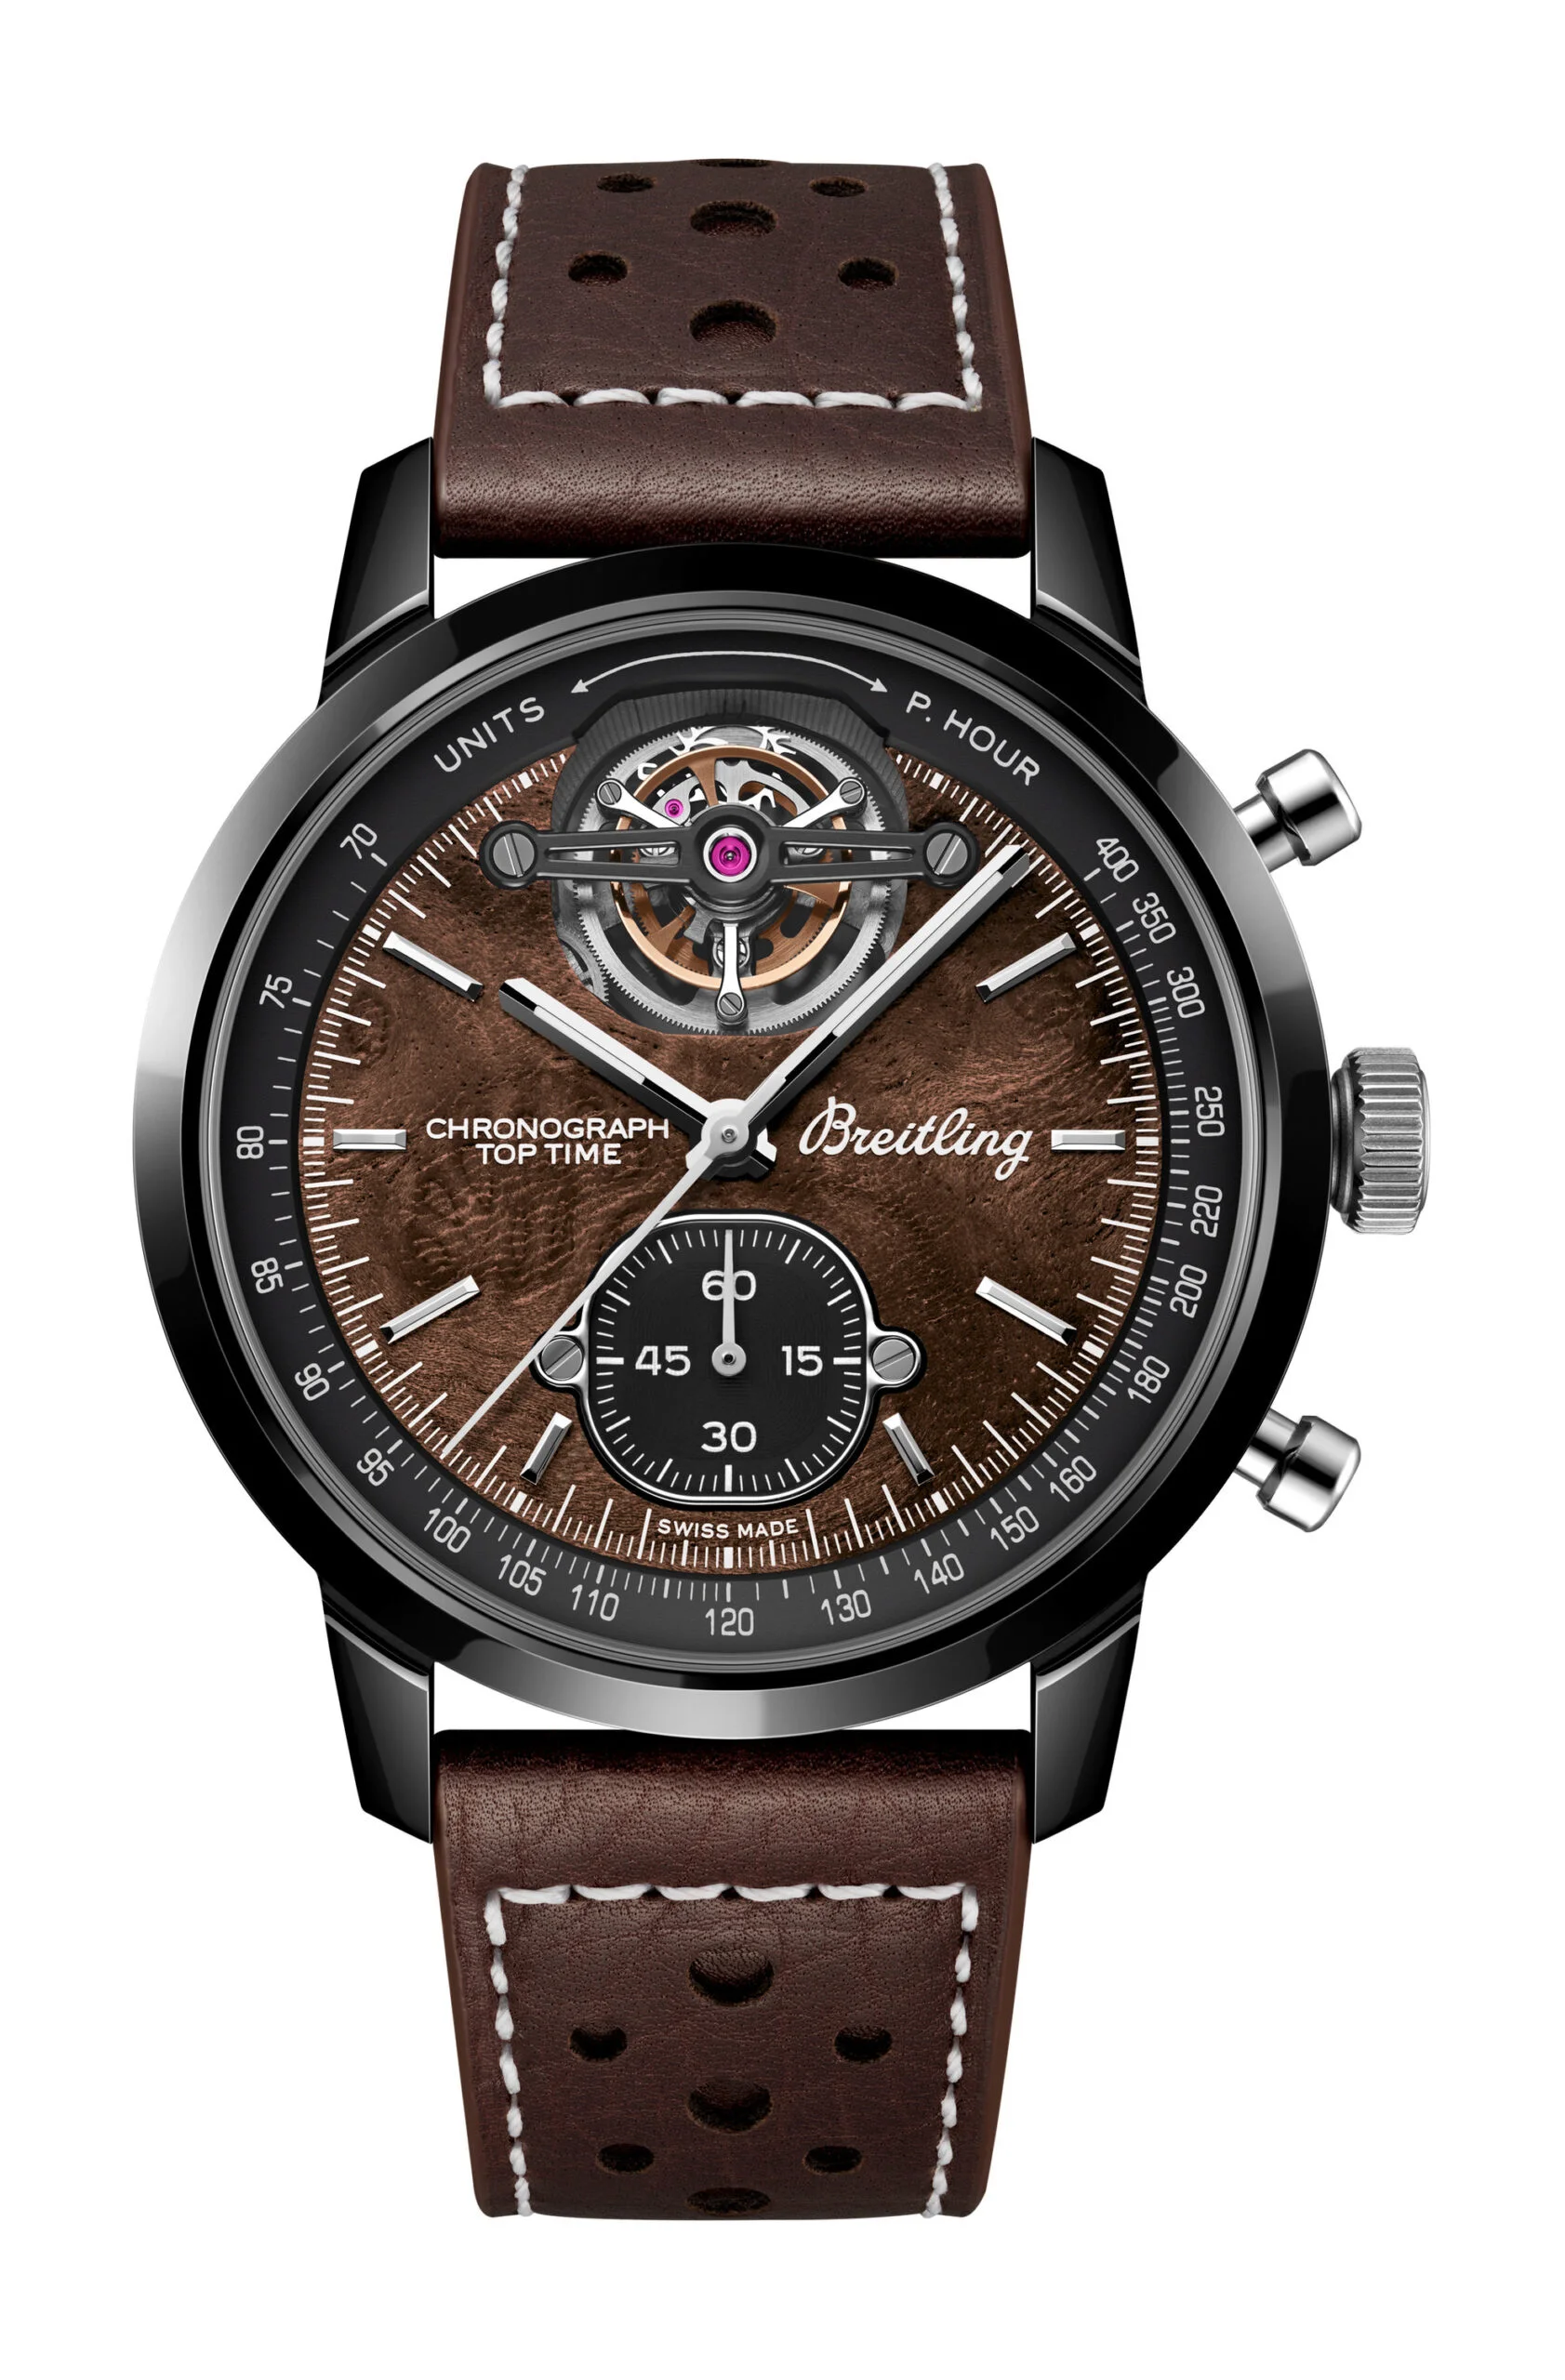 Breitling Top Time American Sports Cars